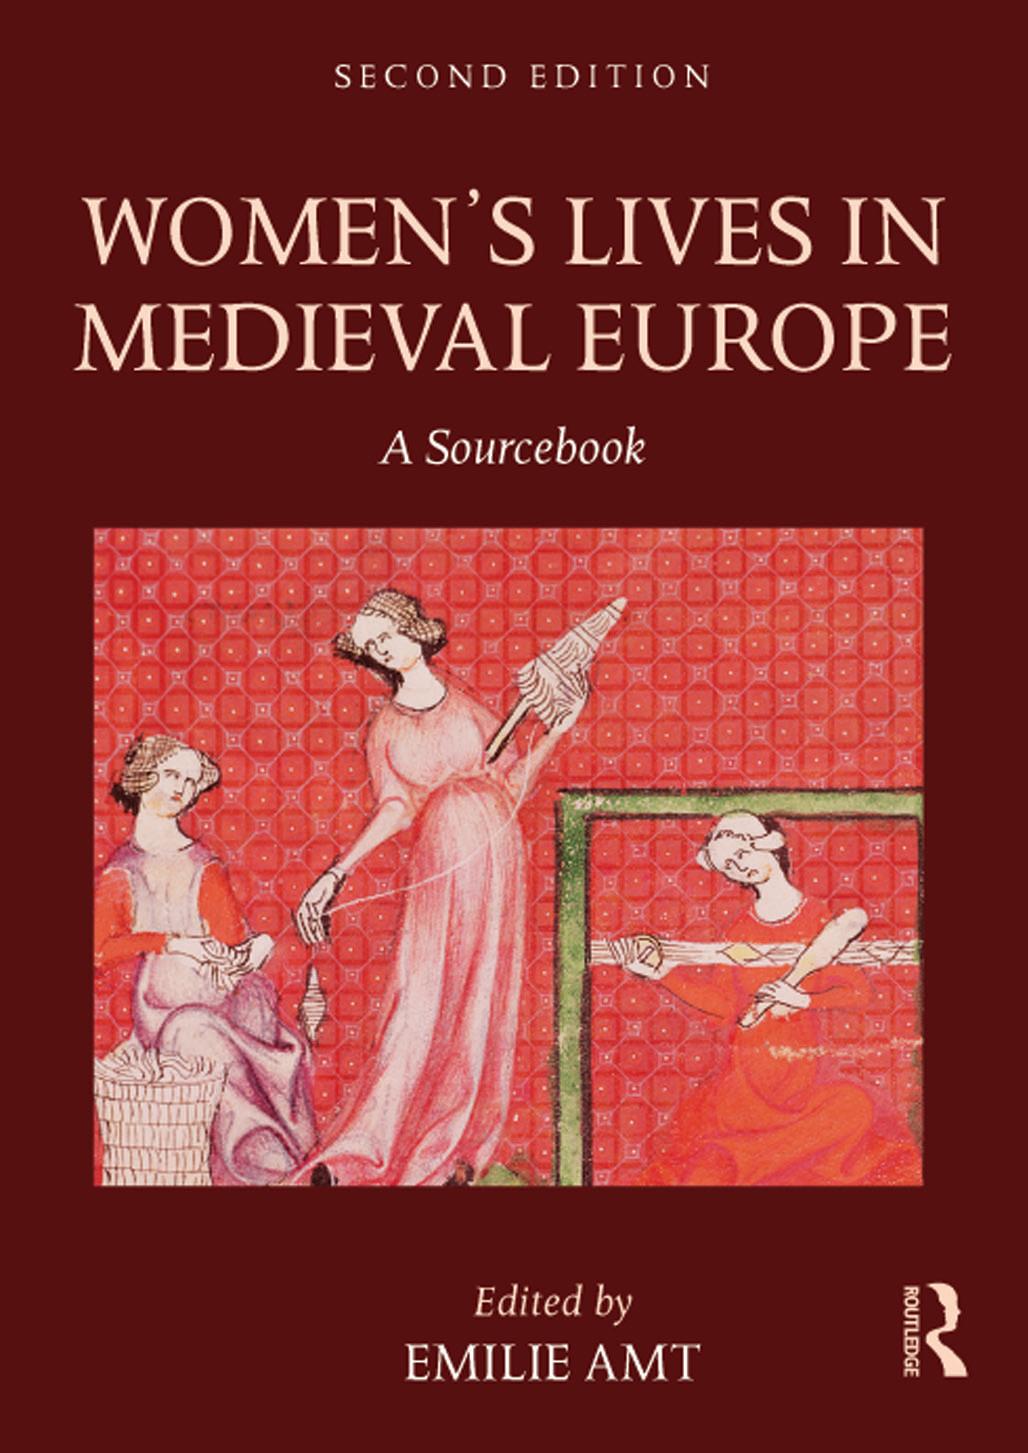 Women's Lives in Medieval Europe - A Sourcebook by Emilie Amt